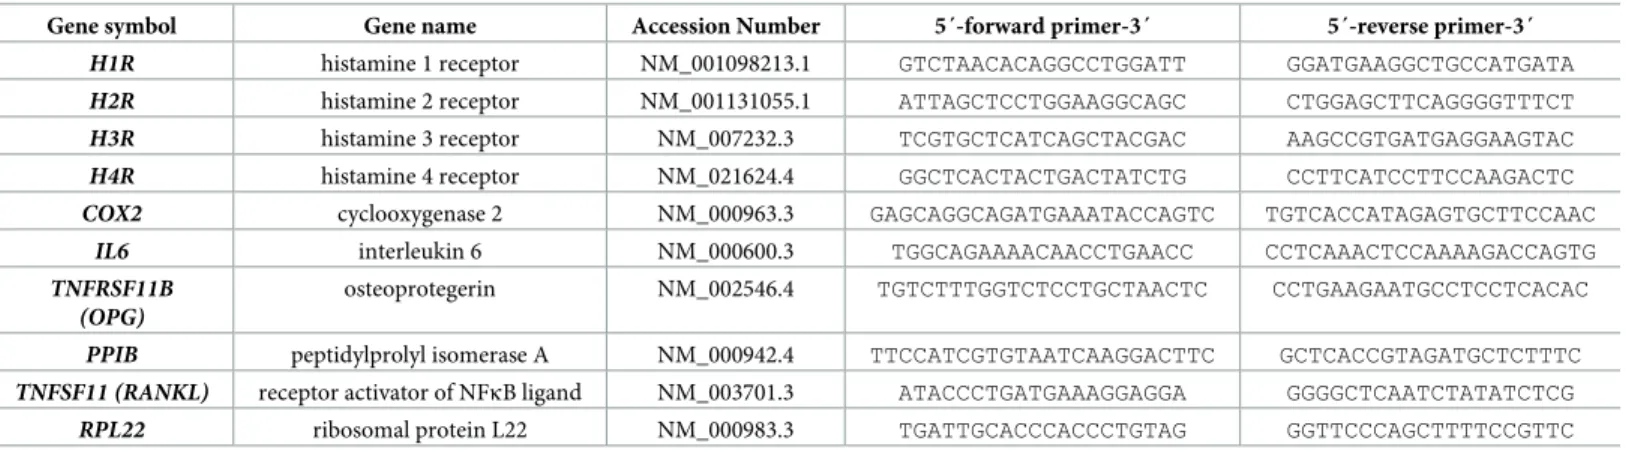 Table 1. Primer data for target genes and reference genes (PPIB, RPL22) for semiquantitative and RT-qPCR.